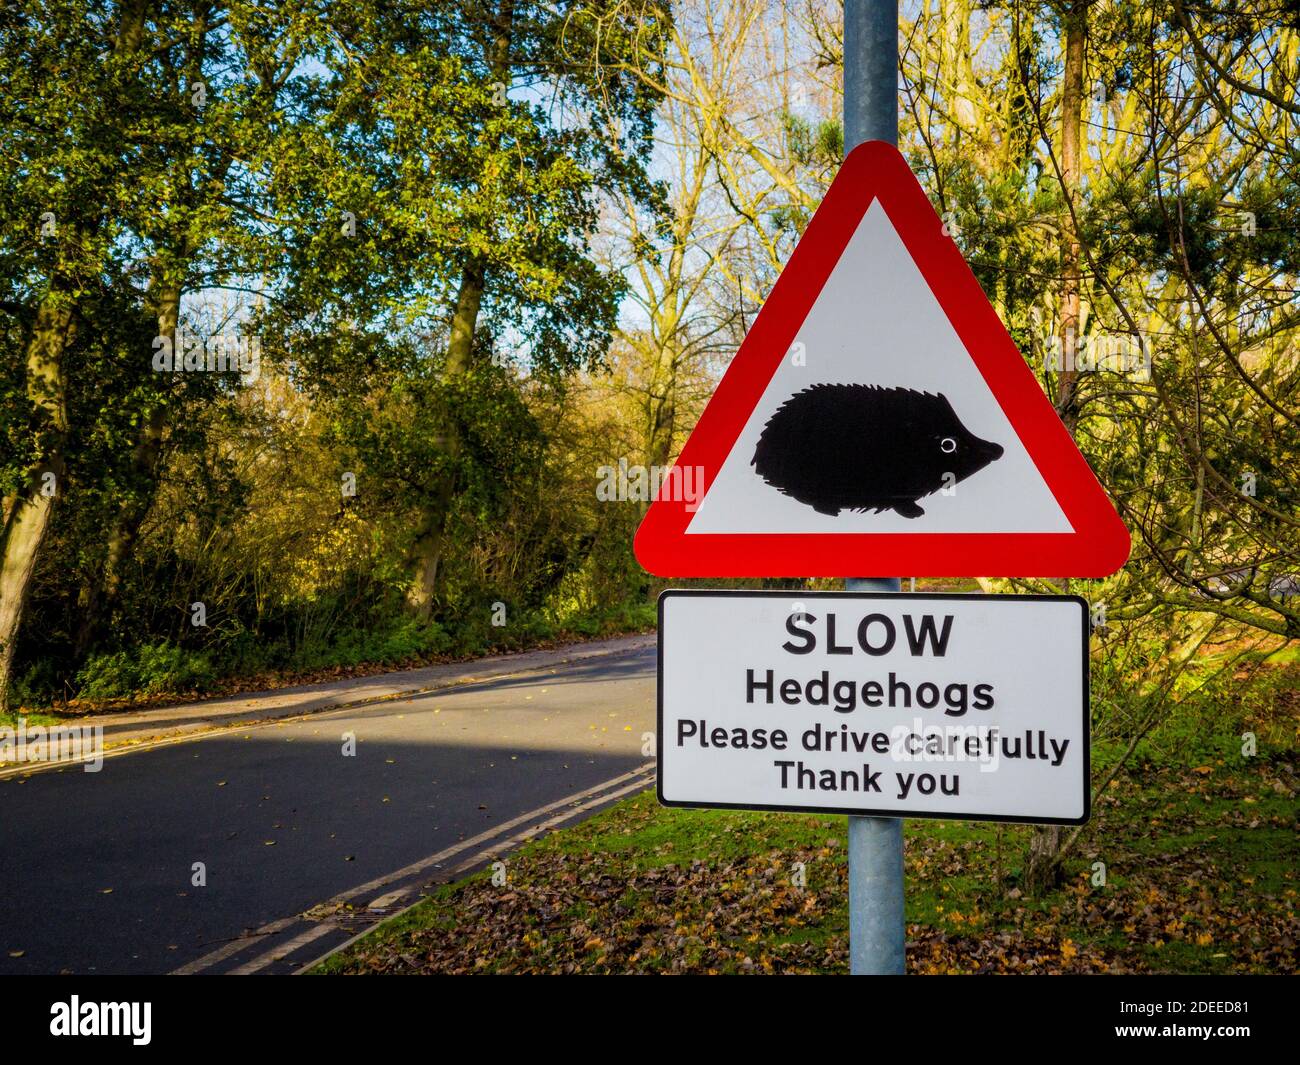 SLOW Hedgehogs. Please drive carefully. Sign at side of road Stock Photo